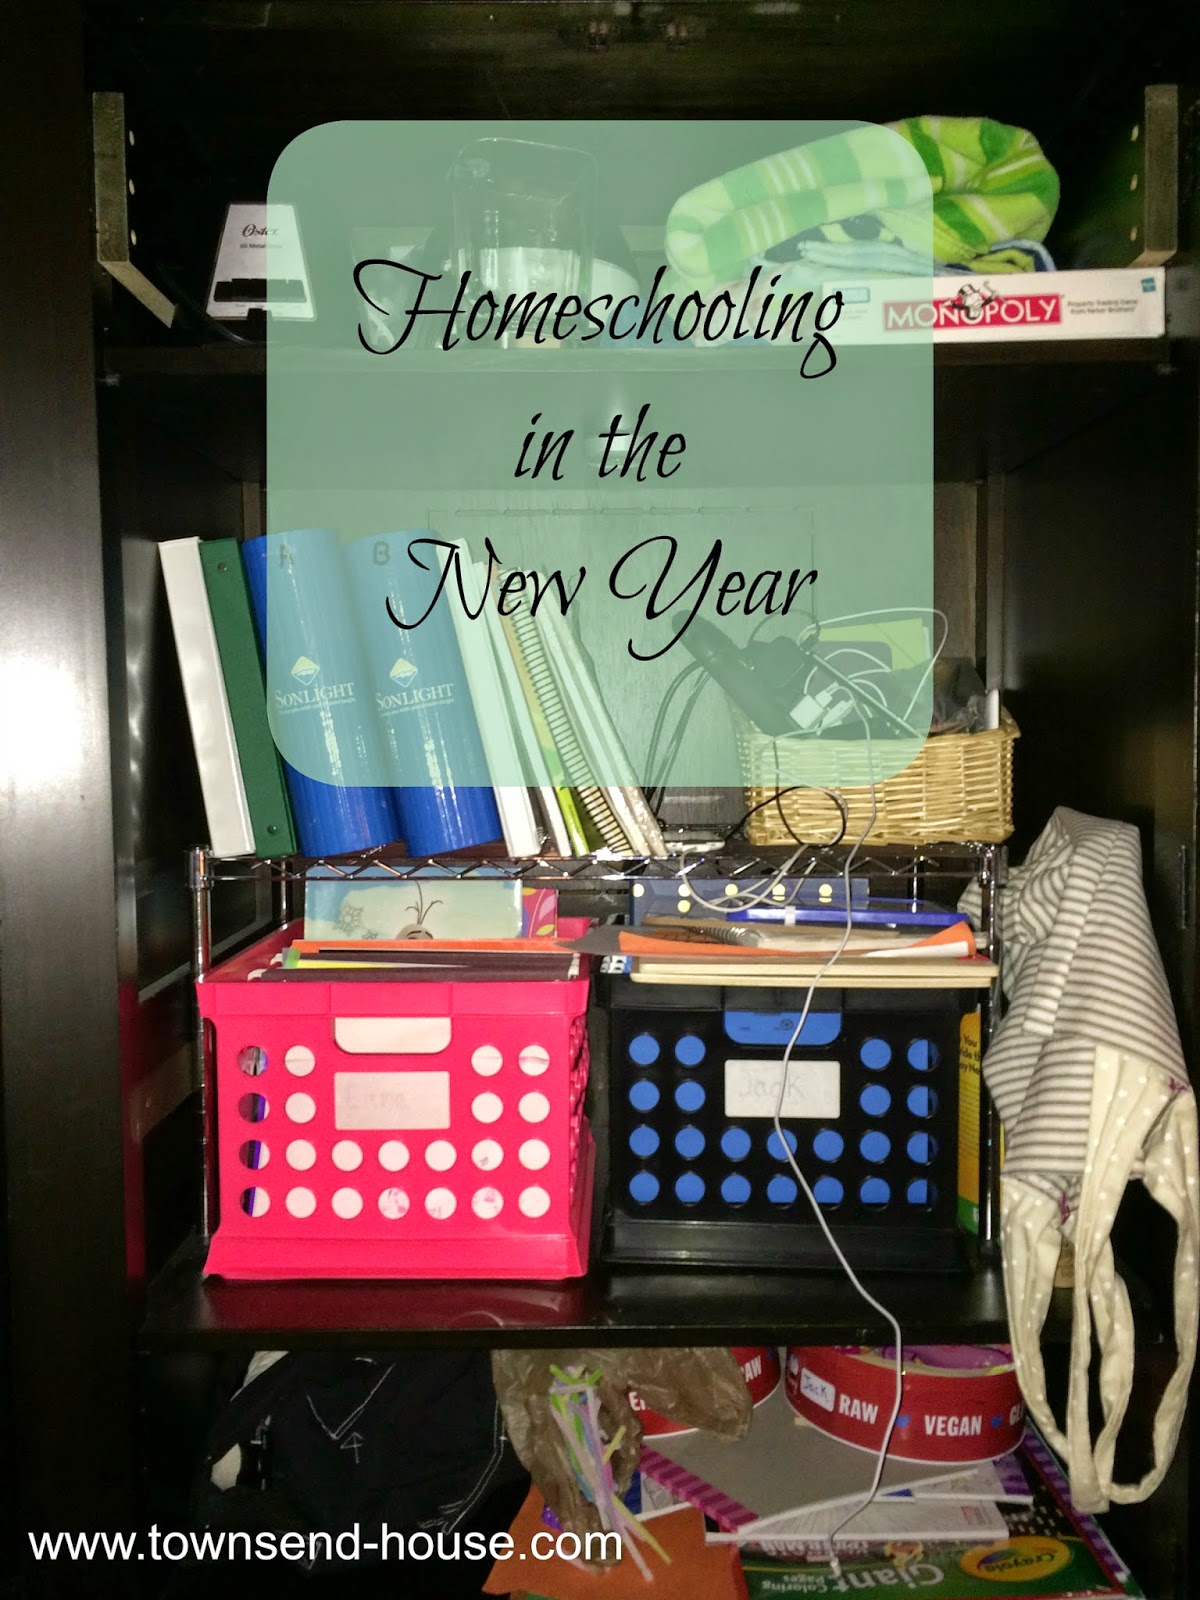 Homeschooling in the New Year